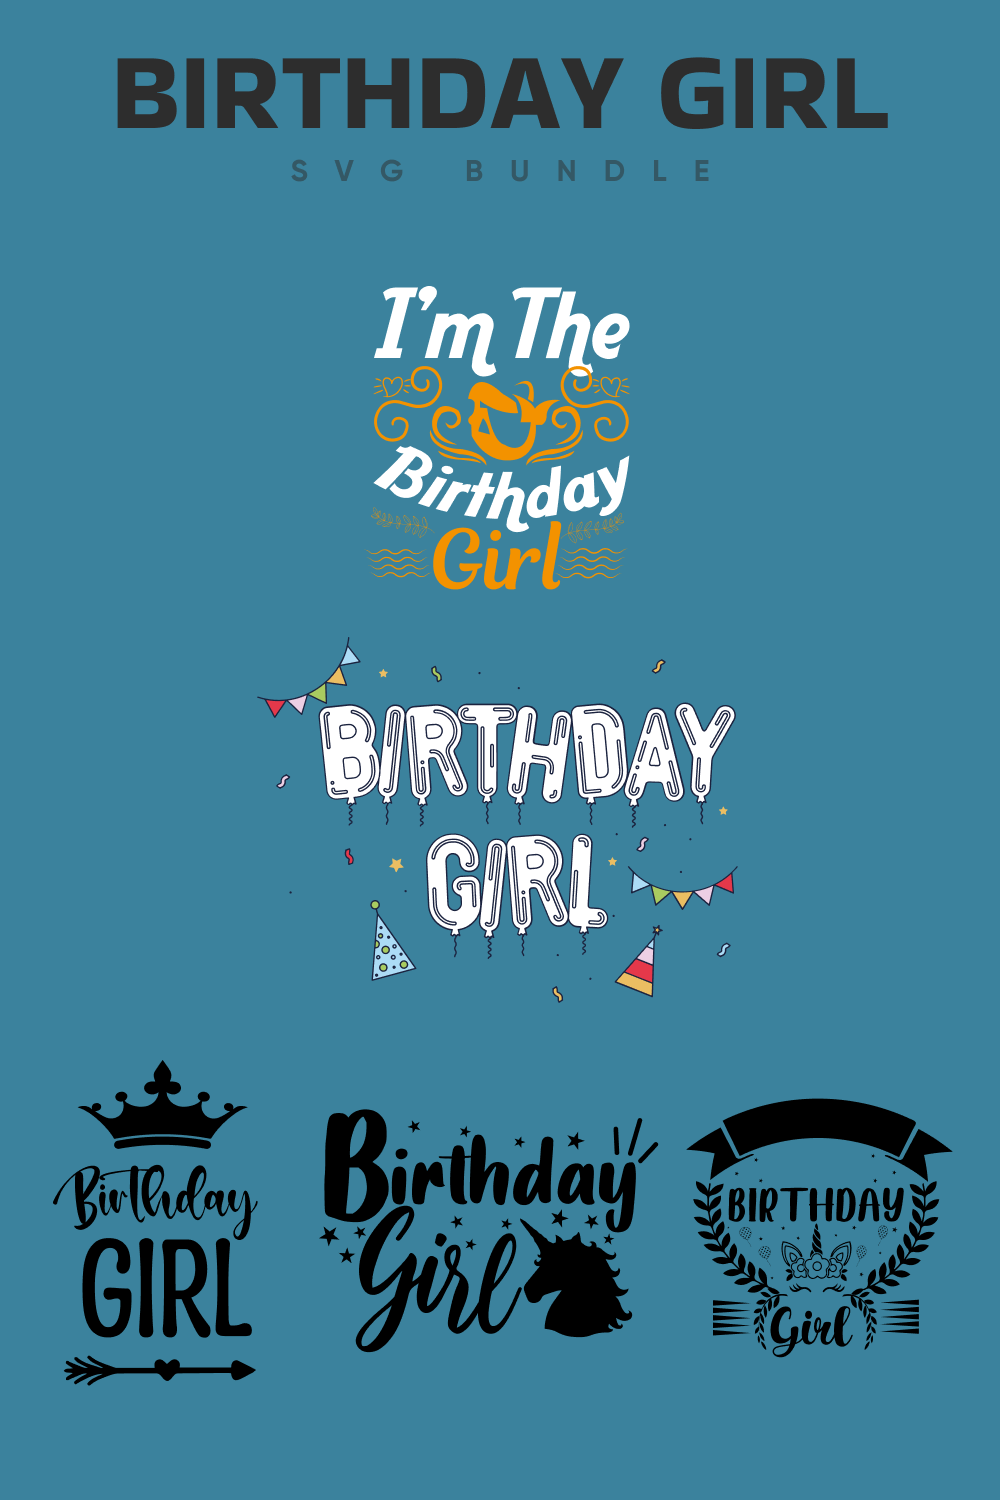 Dark turquoise background with colorful birthday greetings.